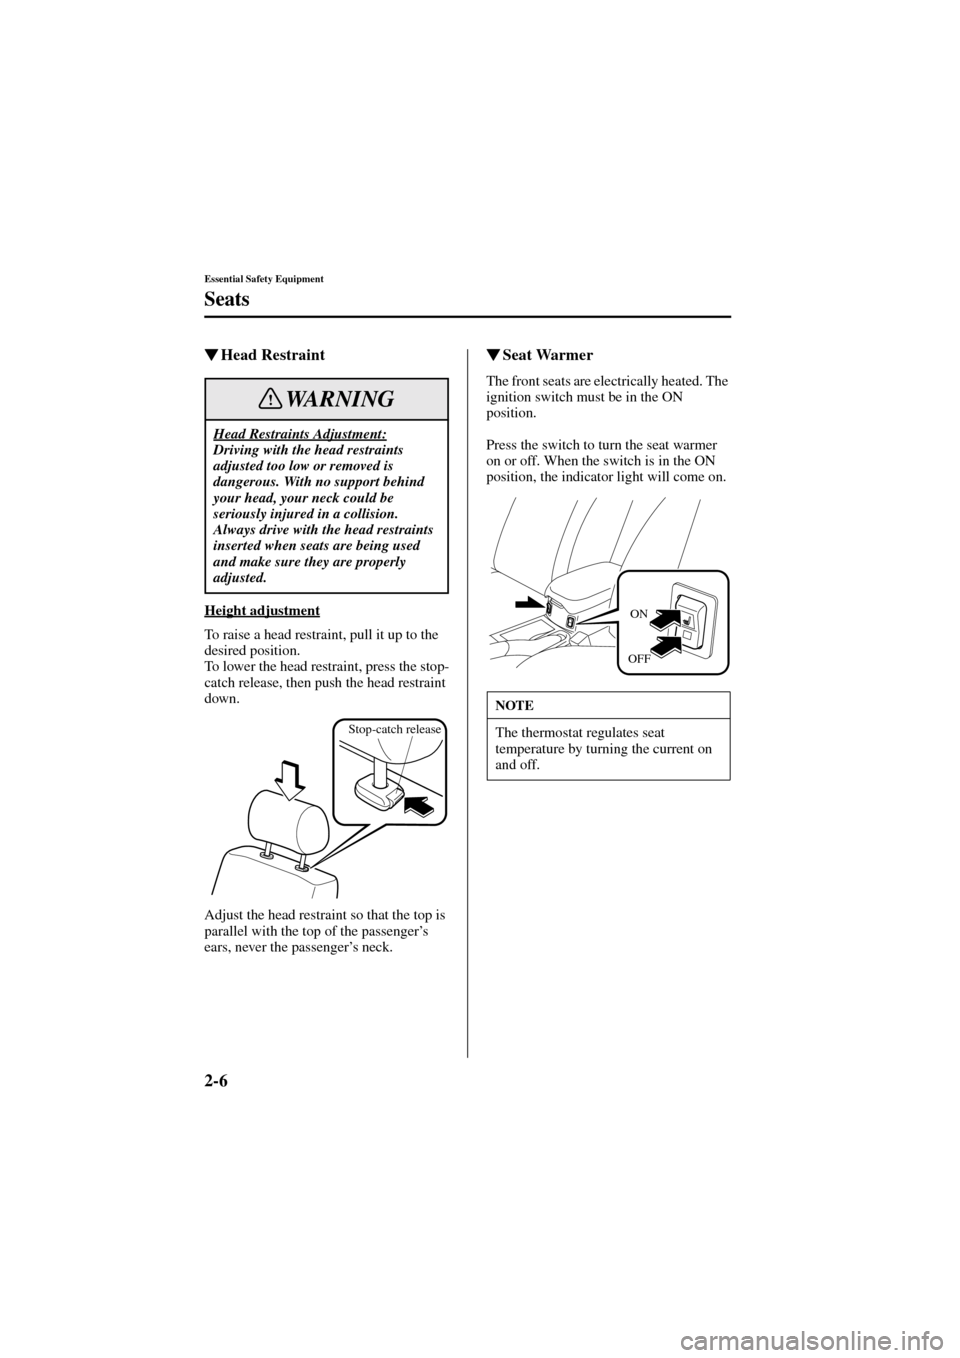 MAZDA MODEL 6 2004  Owners Manual (in English) 2-6
Essential Safety Equipment
Seats
Form No. 8R29-EA-02I
Head Restraint
Height adjustment
To raise a head restraint, pull it up to the 
desired position.
To lower the head restraint, press the stop-